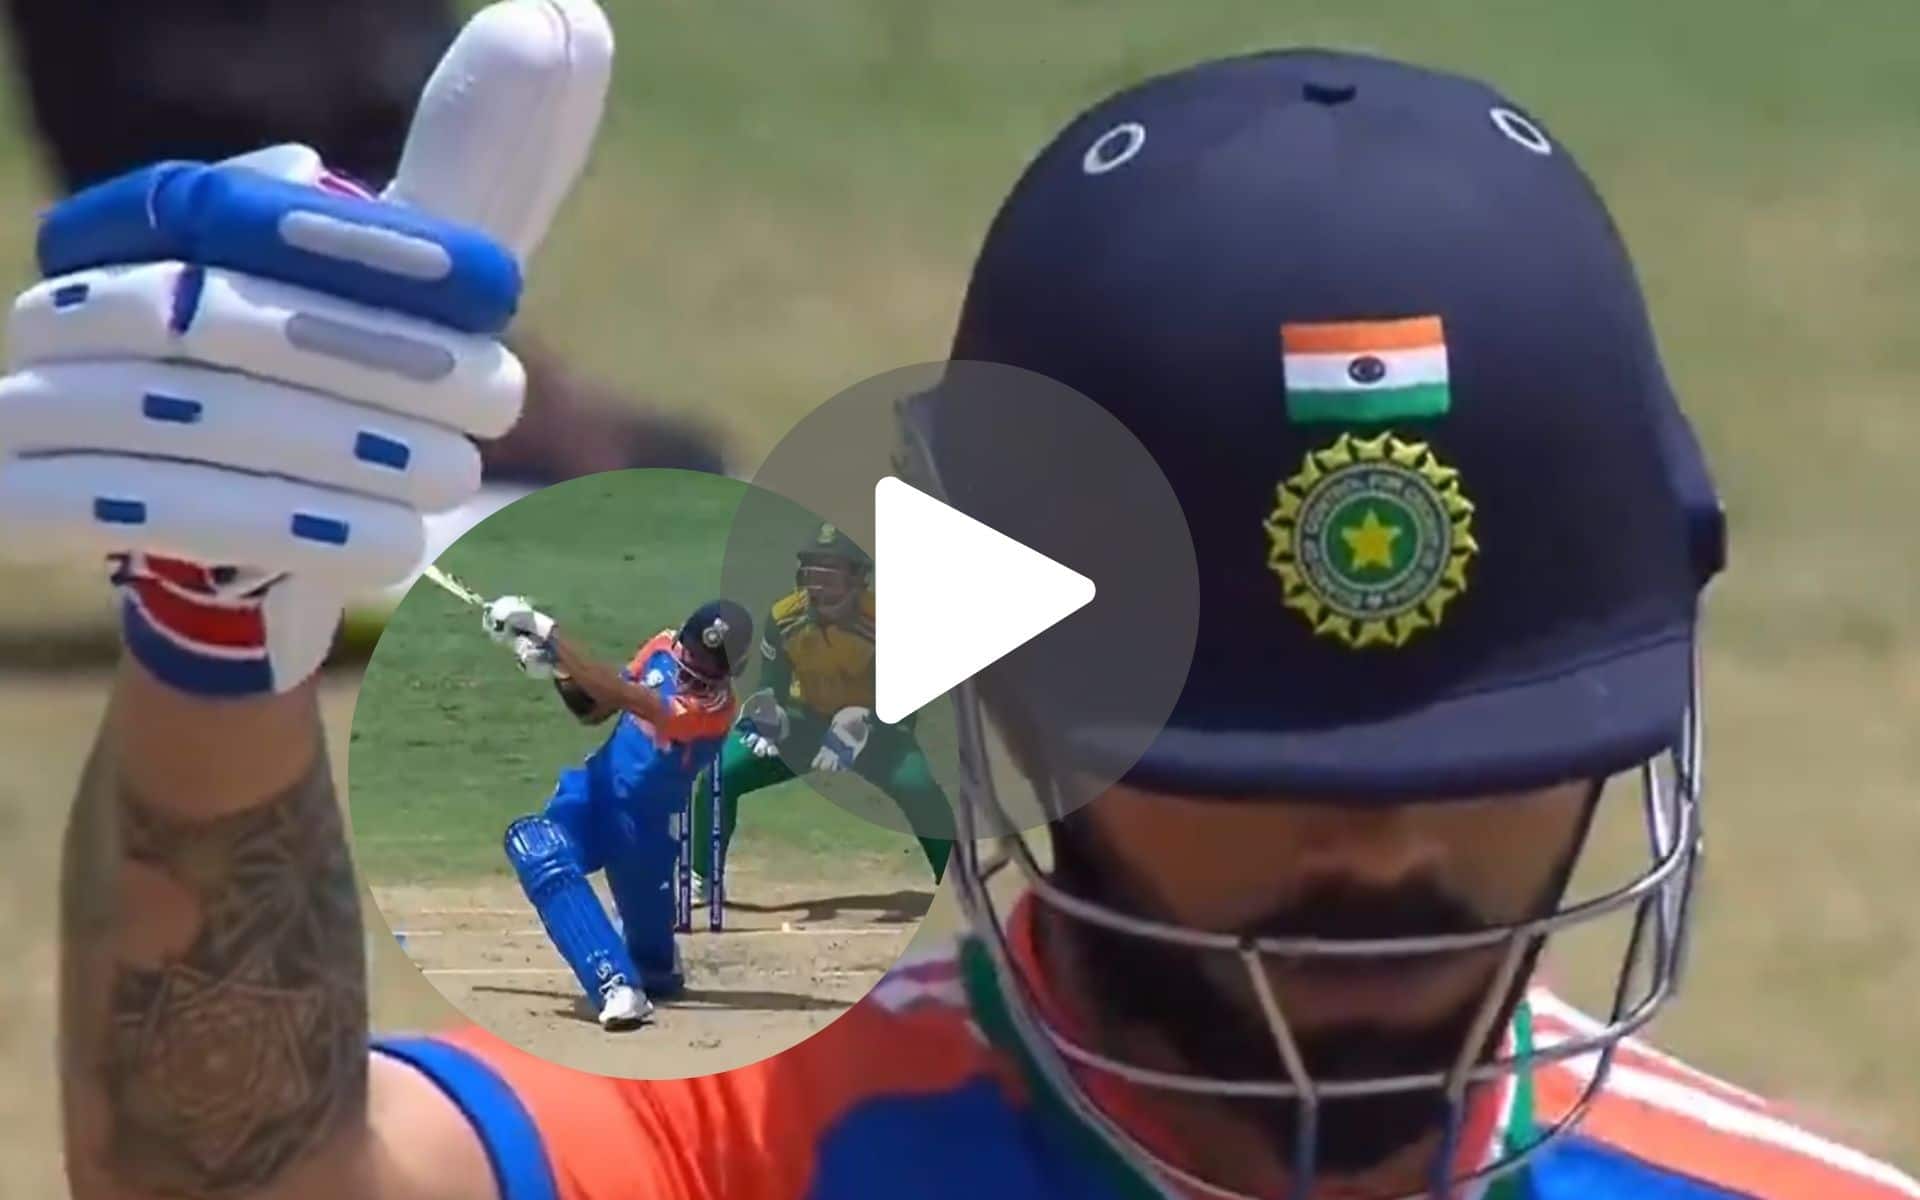 [Watch] Virat Kohli's Passionate 'Thumbs Up' To Axar As He Blasts Maharaj For A Six